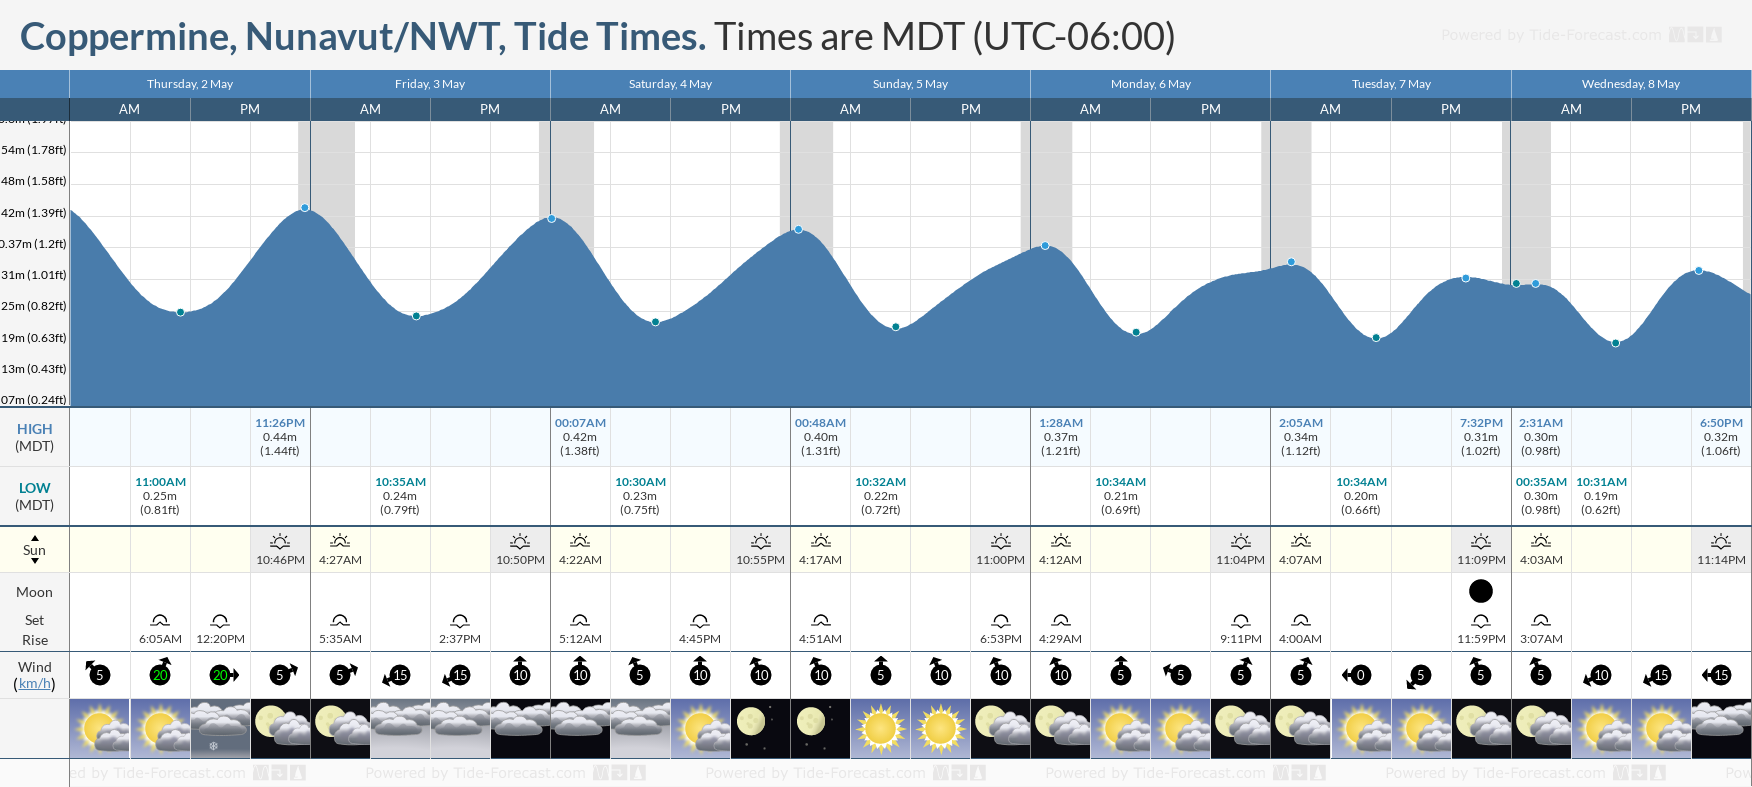 Coppermine, Nunavut/NWT Tide Chart including high and low tide tide times for the next 7 days